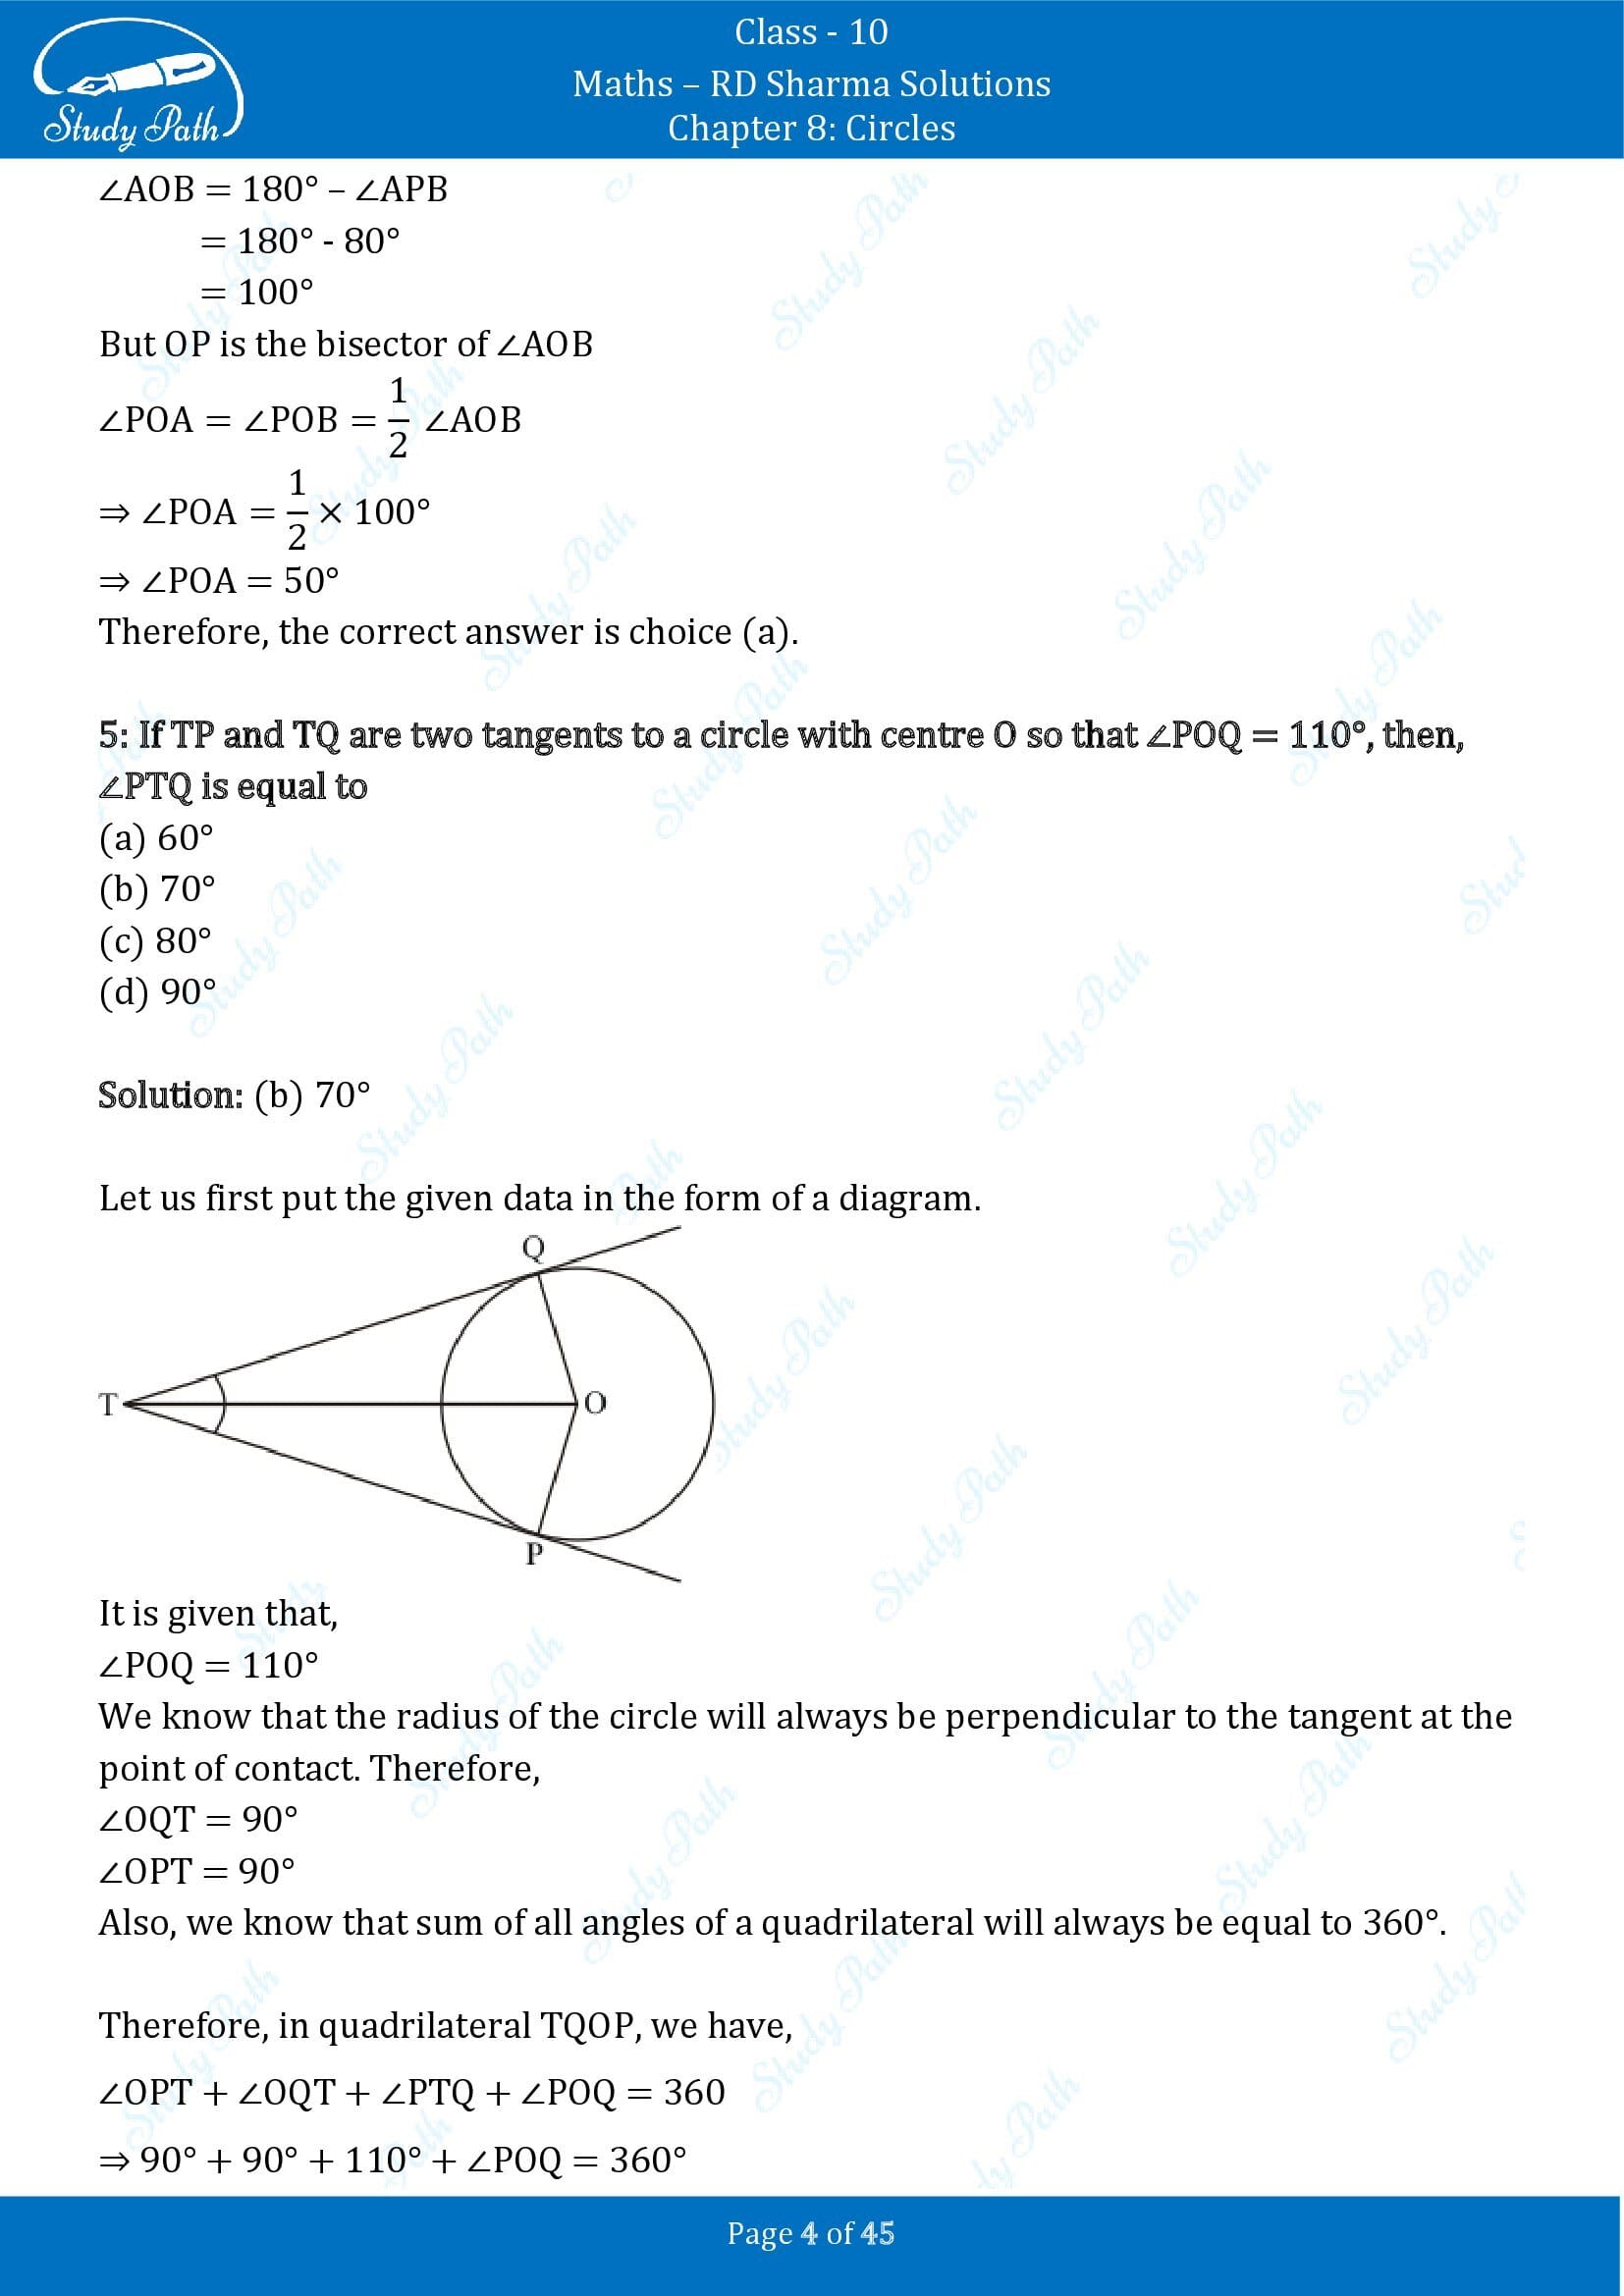 RD Sharma Solutions Class 10 Chapter 8 Circles Multiple Choice Questions MCQs 00004